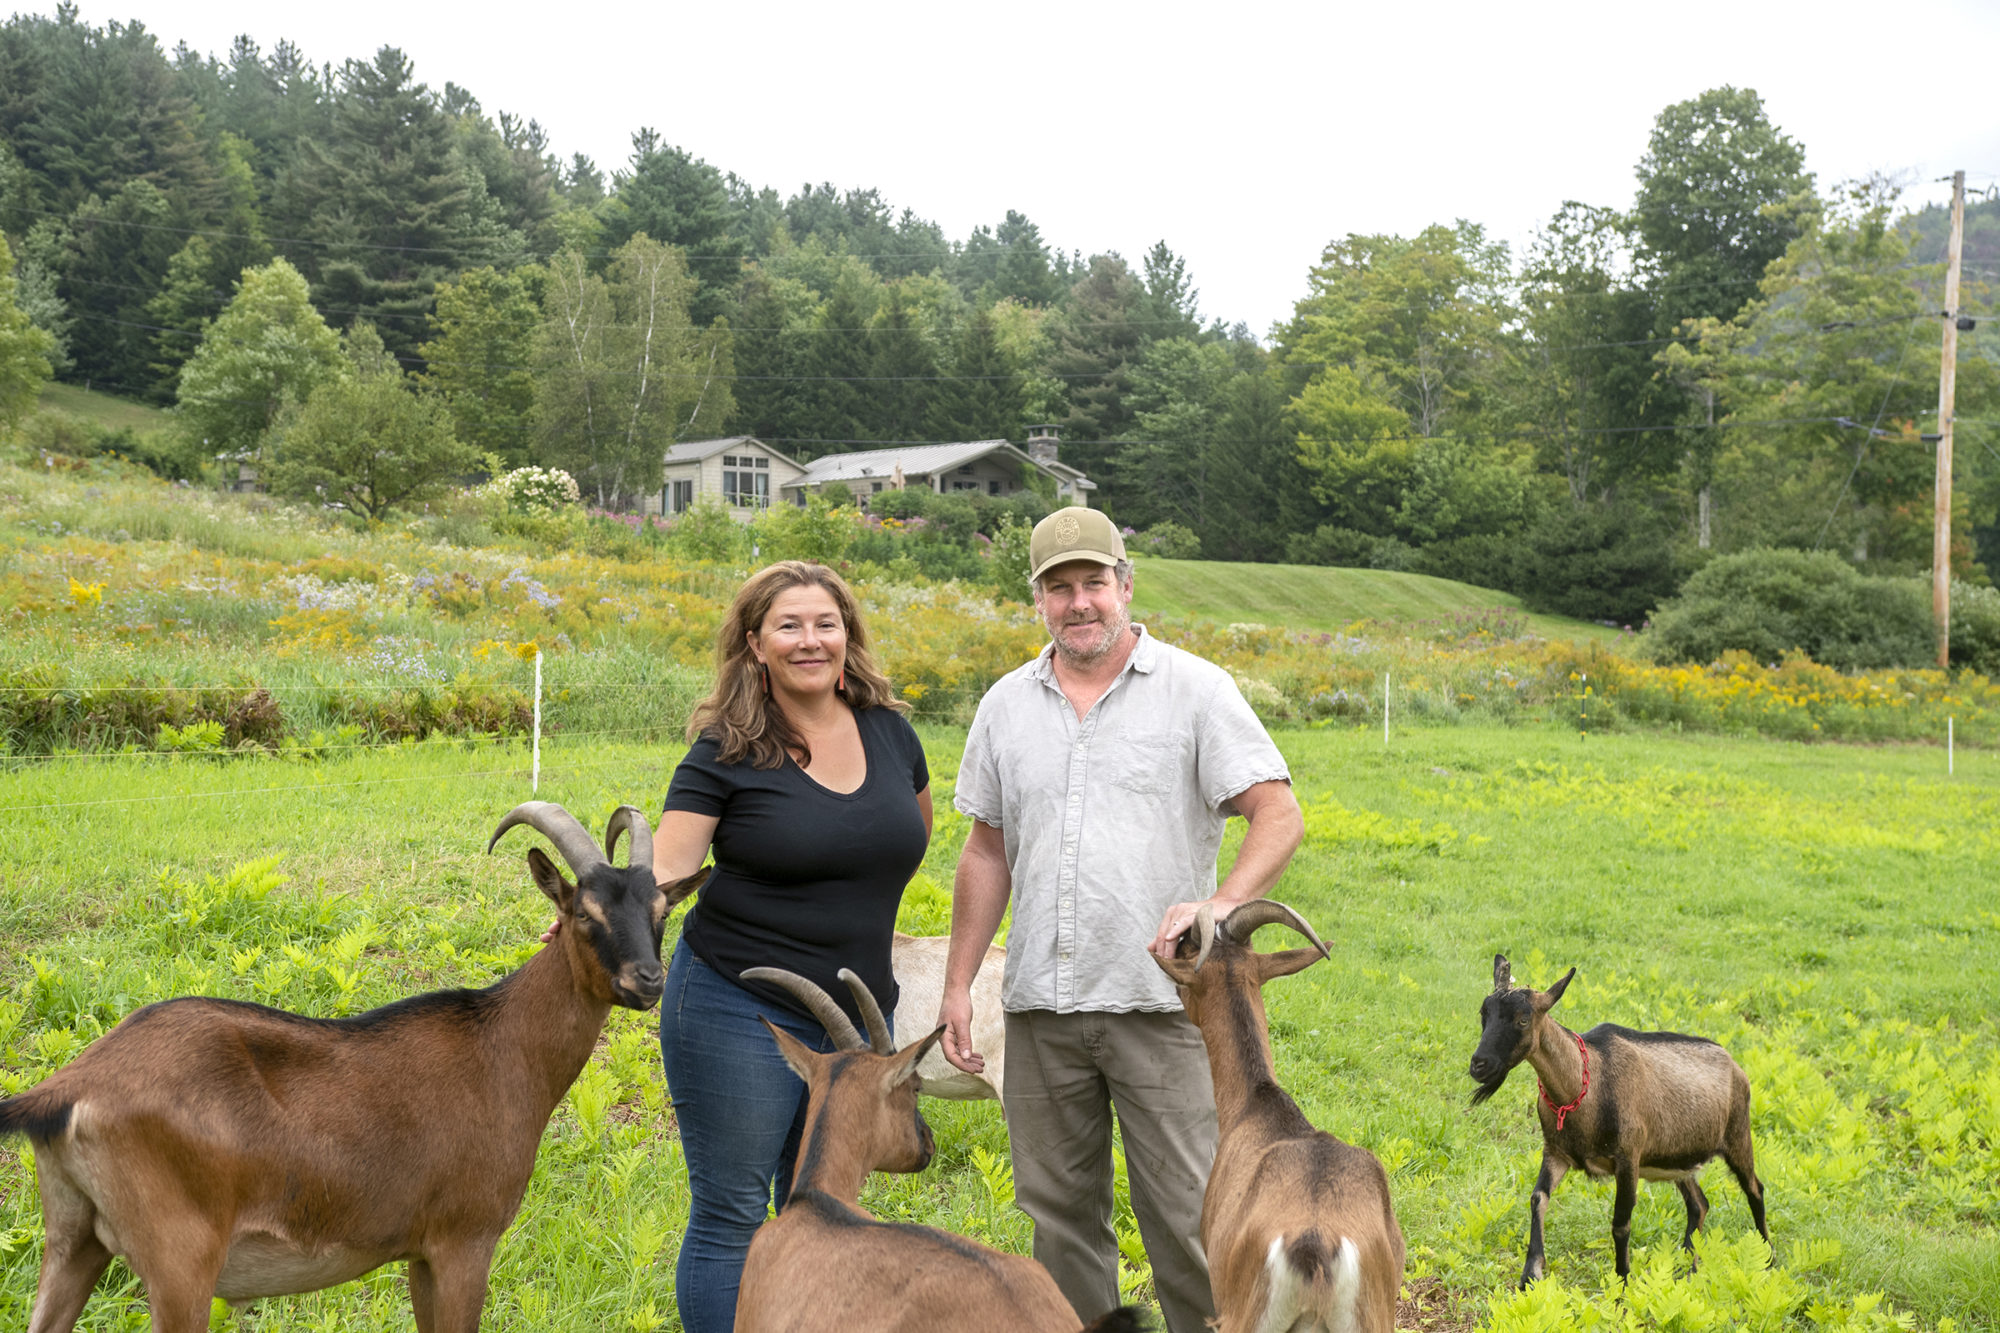 Rebecca and Joe Pimentel with their Alpine Nubian goats at their home in Stockbridge. Photo by Erica Houskeeper.